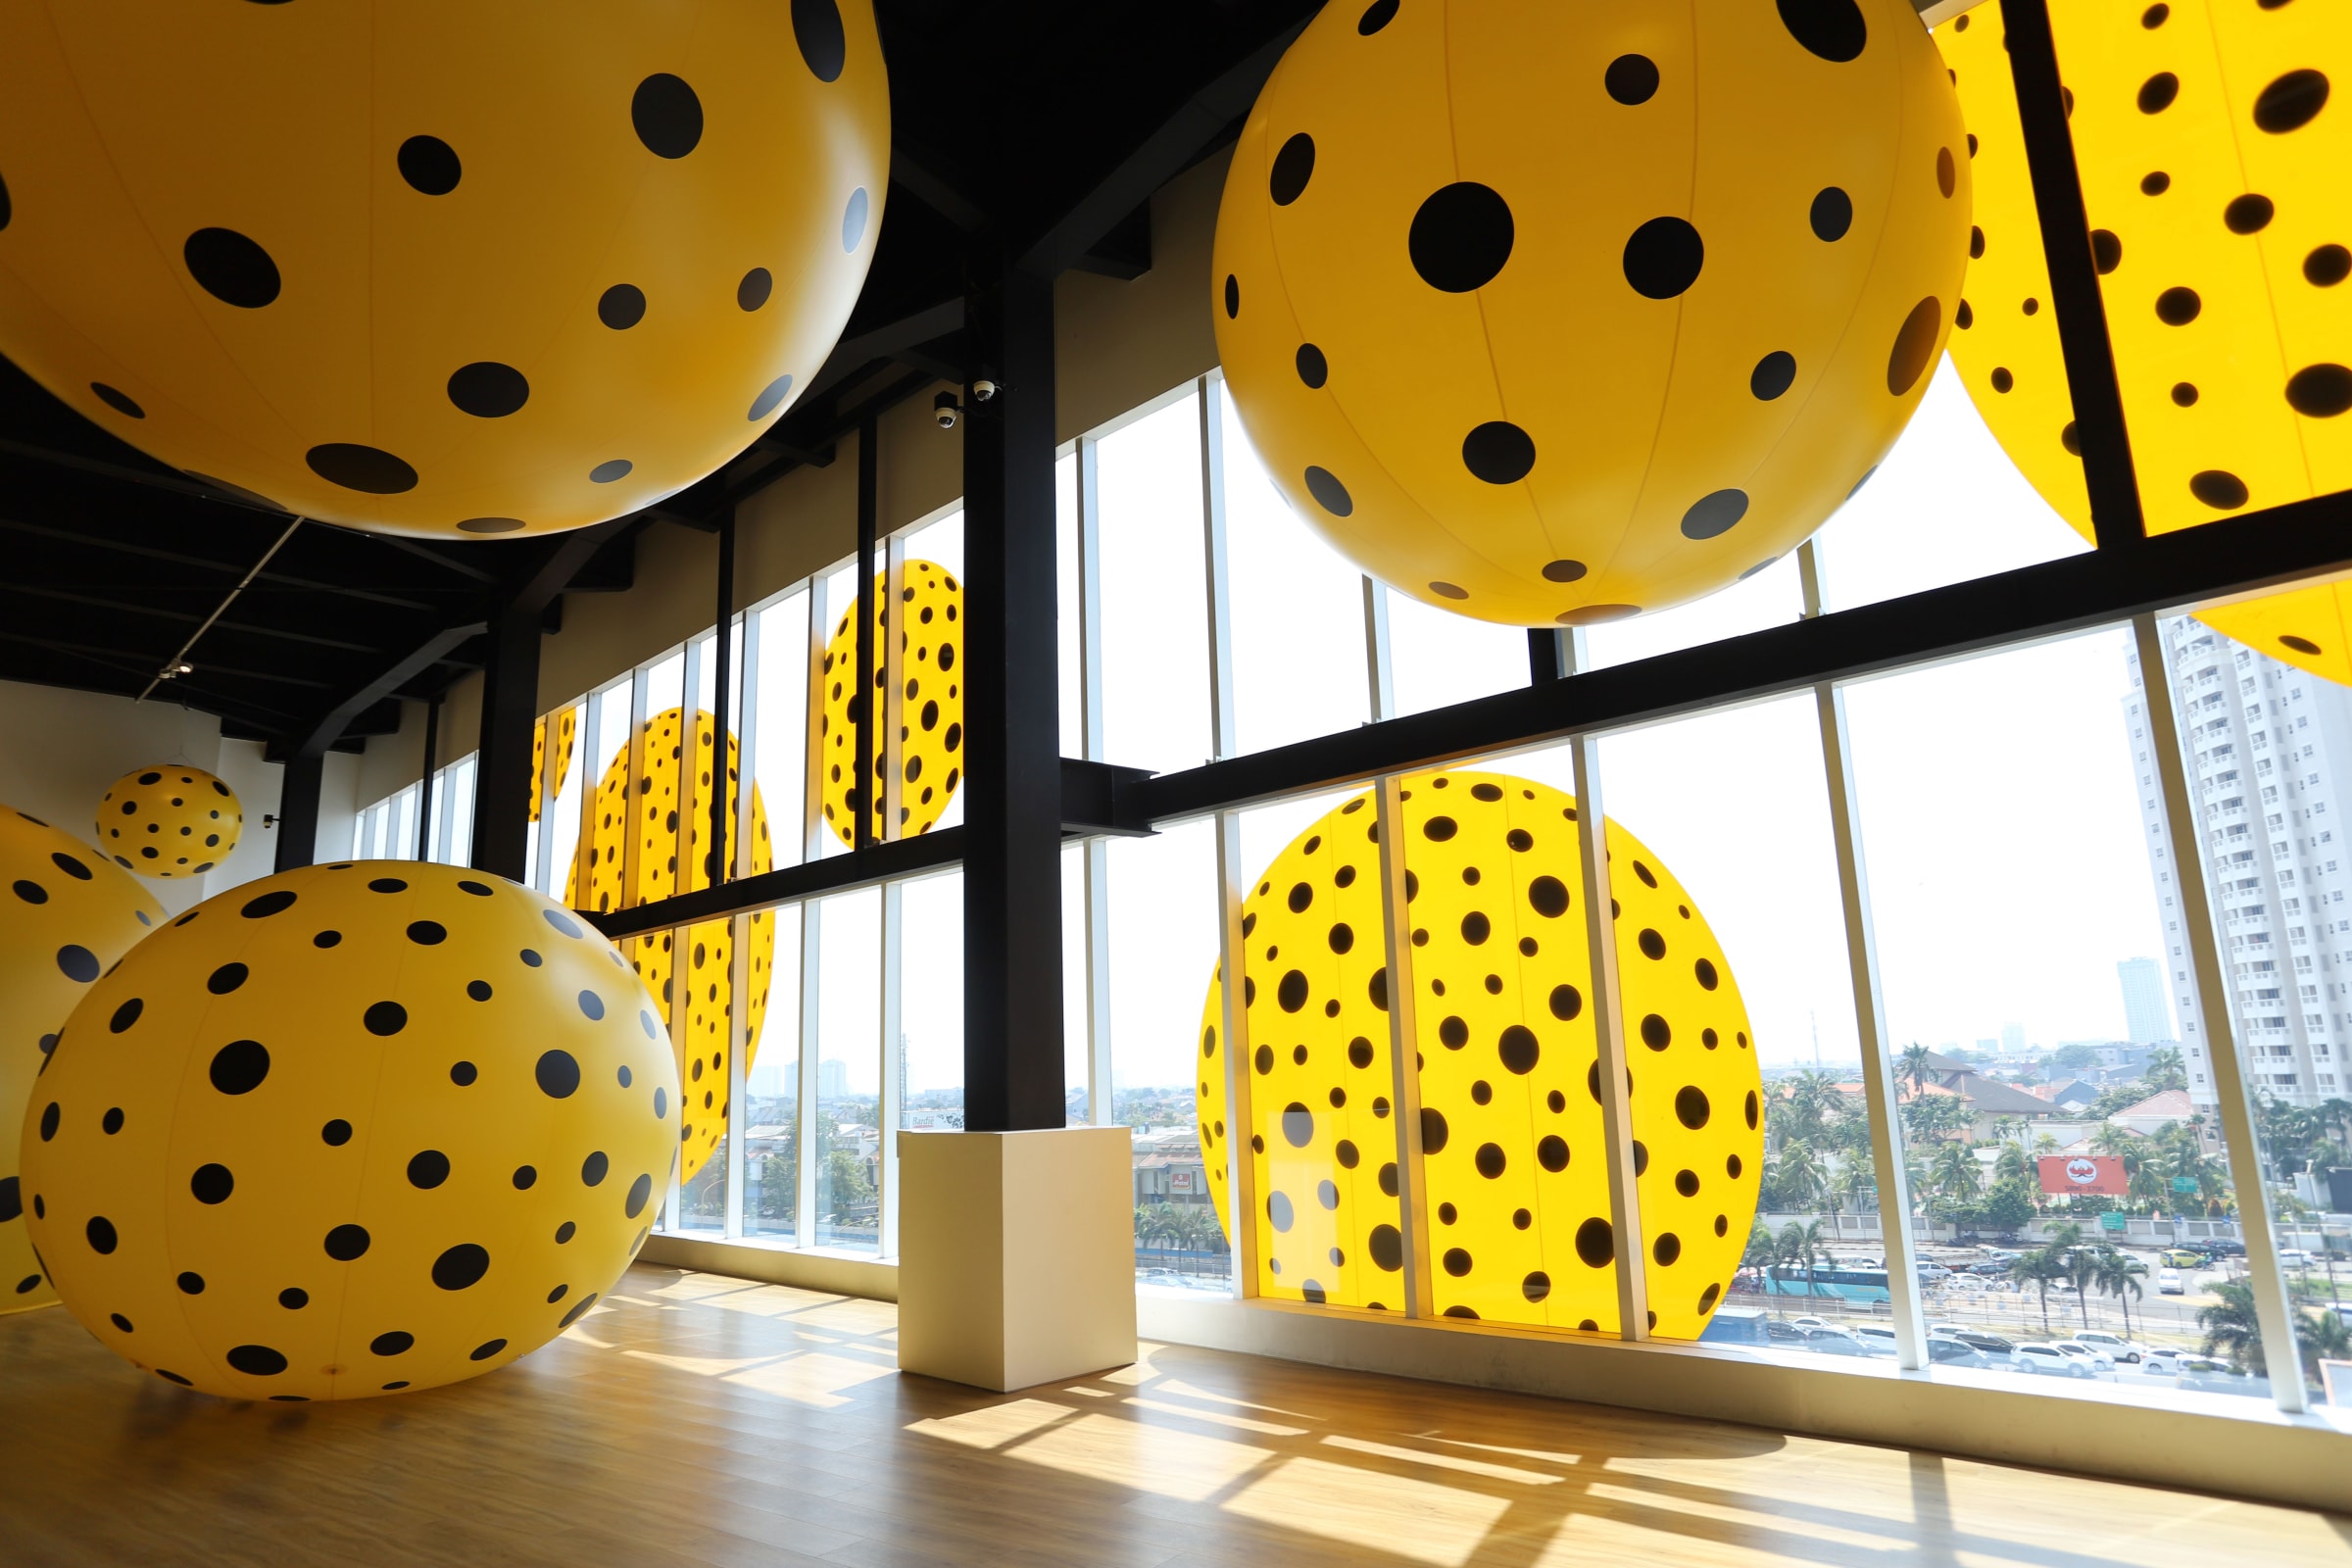 Artist of the day: Artist of the day, August 24: Yayoi Kusama, Japanese  painter, sculptor and novelist